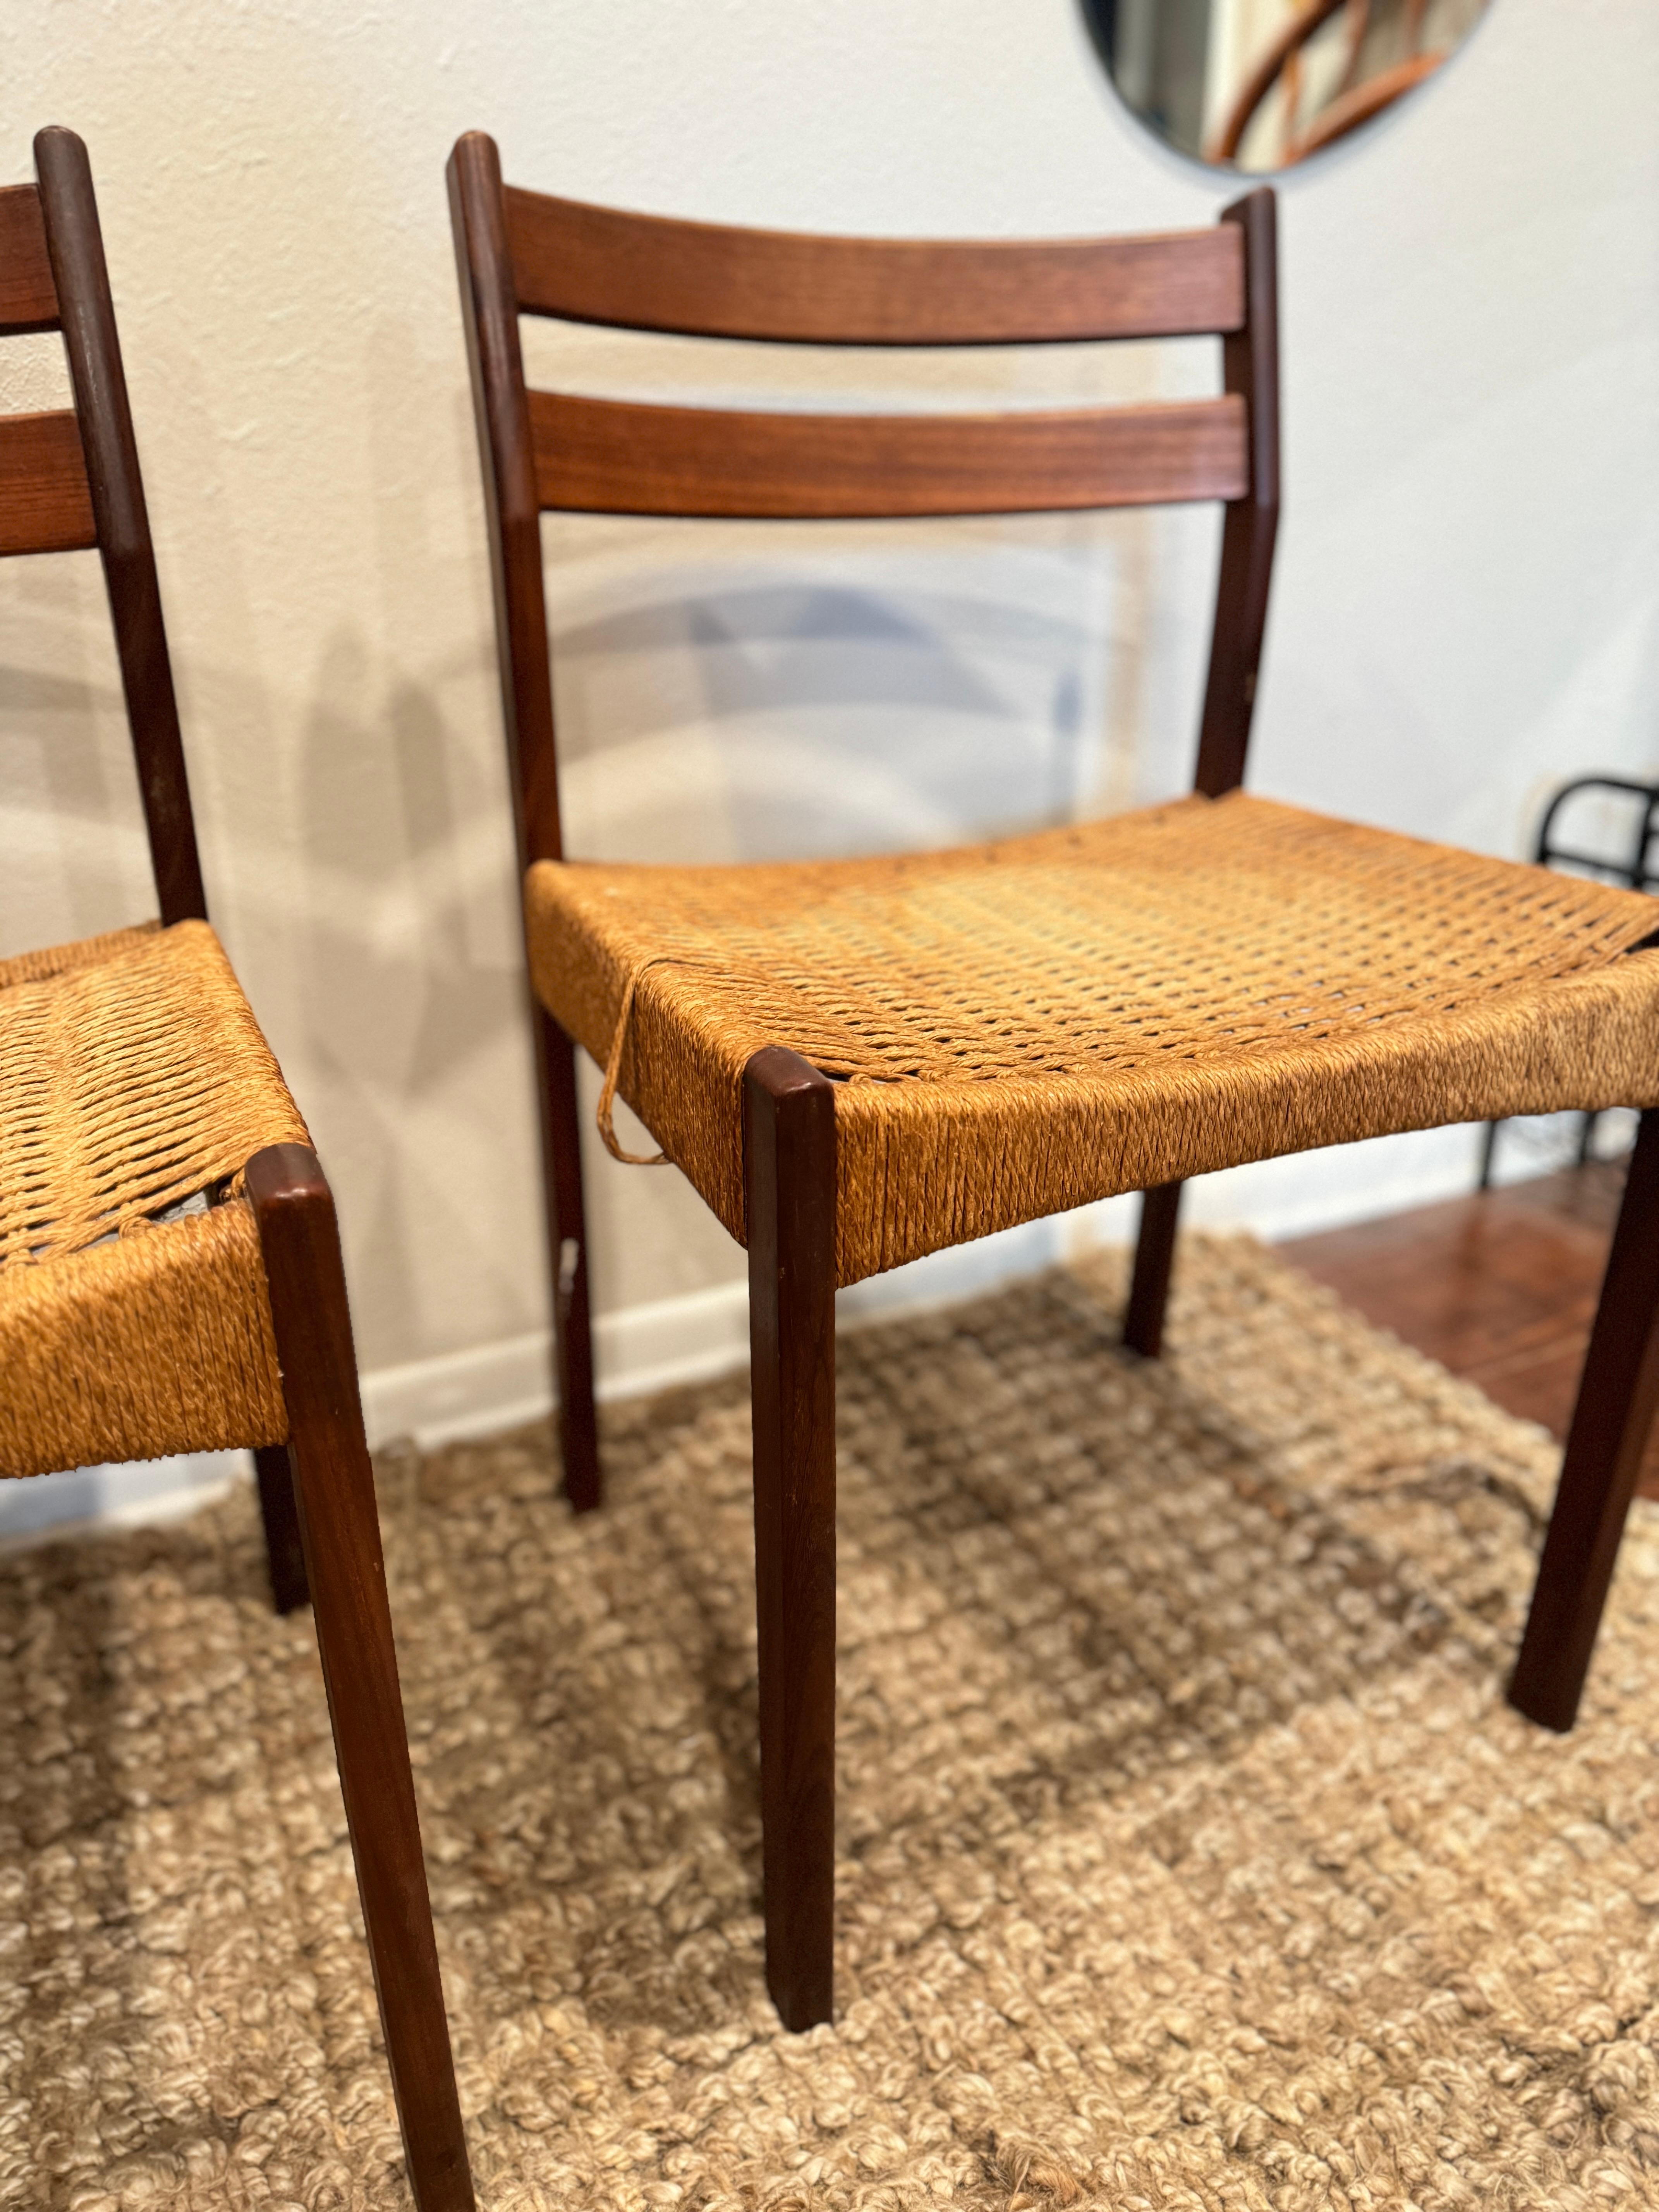 a set of 4 dining chairs designed by Arne Hovmand Olsen, produced by Mogens Kold, circa 1950s. The chairs are made from teak with original paper cord seating. They’re structurally sound, but the seats do have some wear. Totally useable as